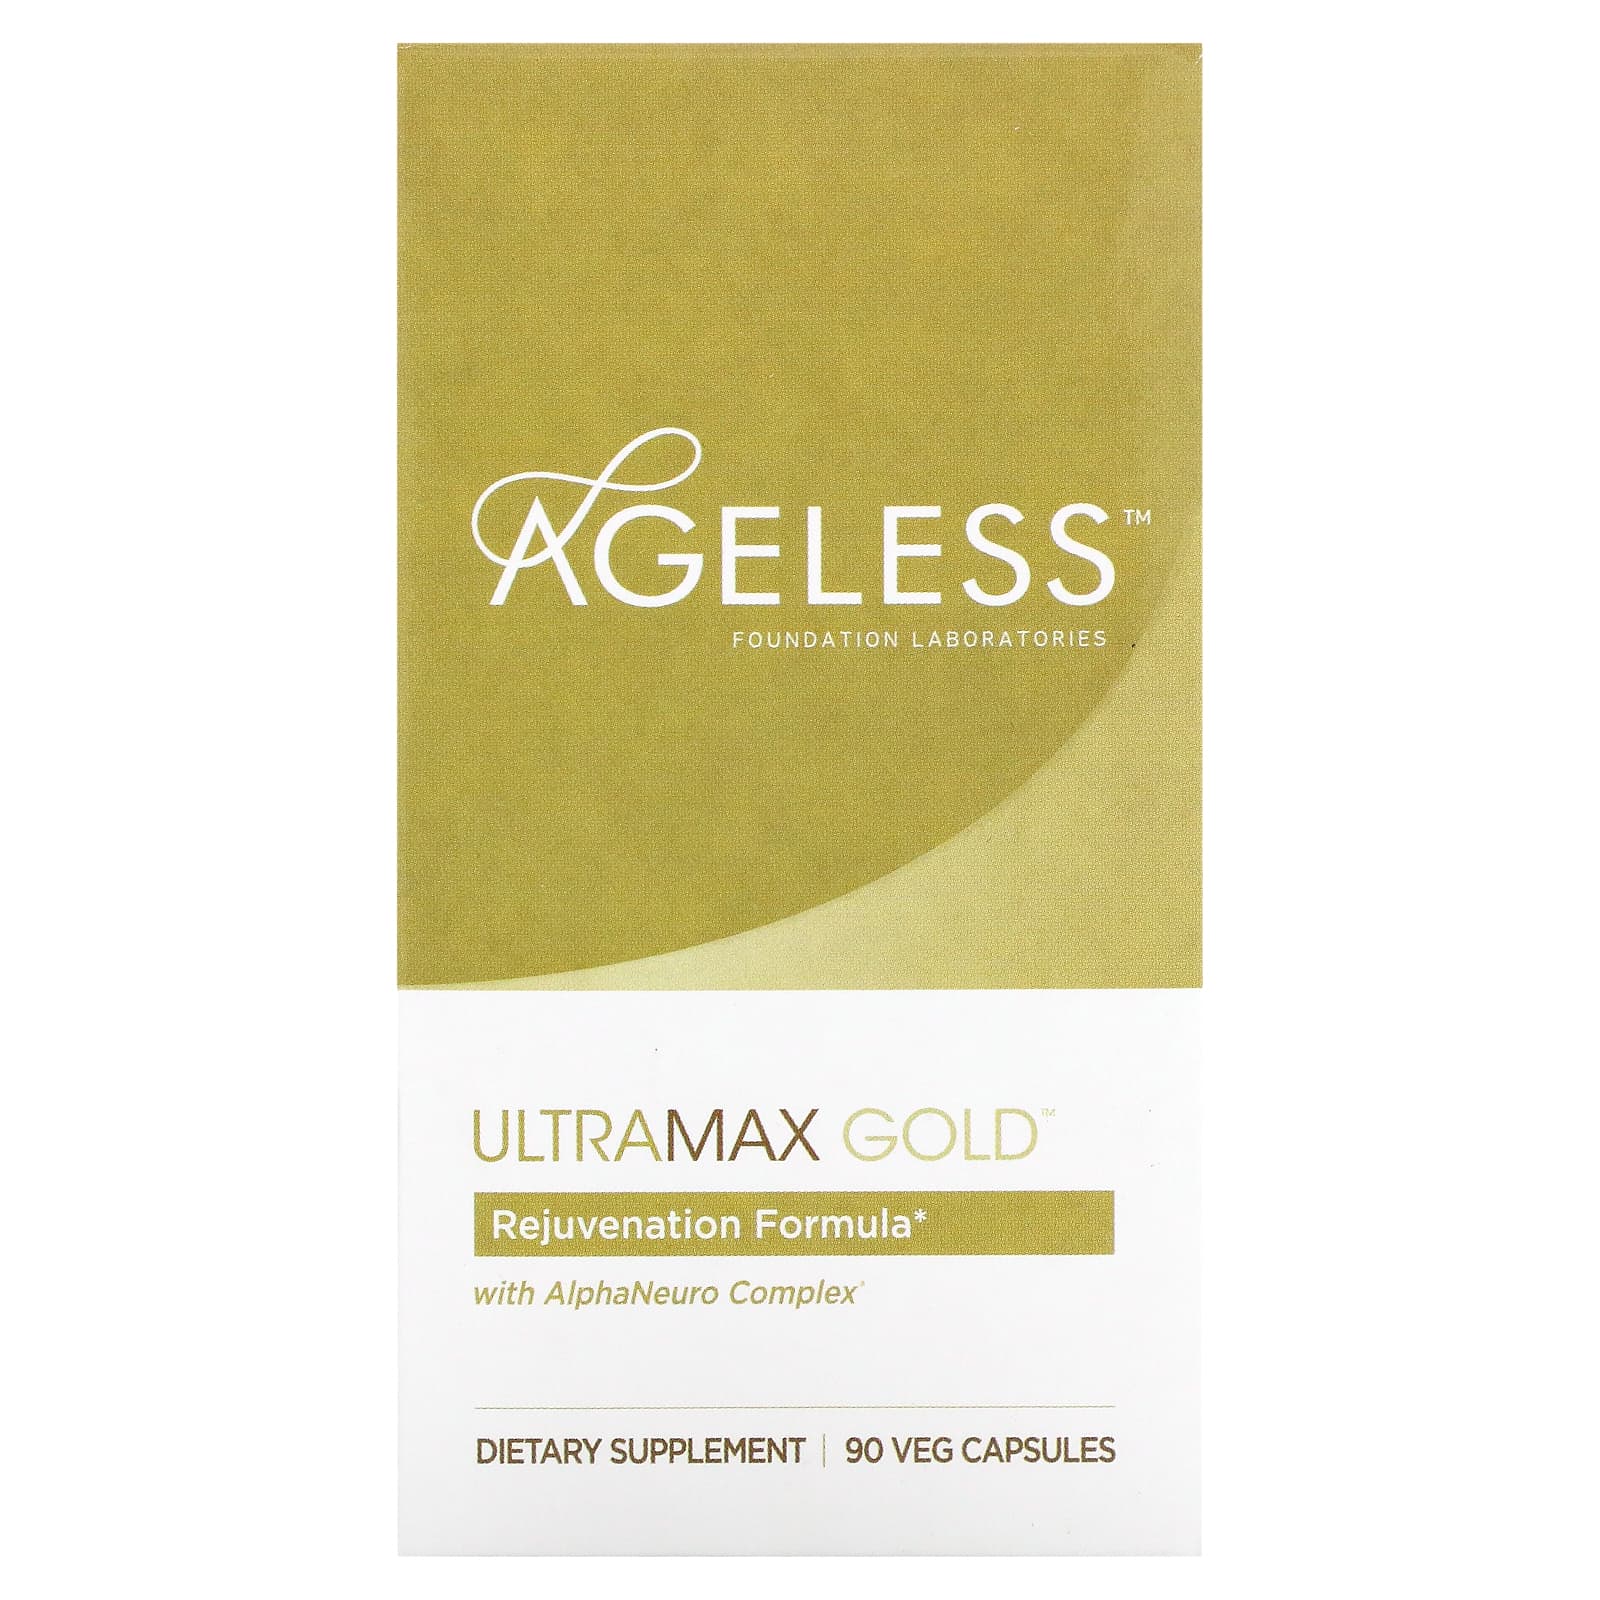 Ageless Foundation Laboratories UltraMax Gold with AlphaNeuro Complex 90 Veg Capsules добавка ageless foundation laboratories для поддержки мозга 60 капсул